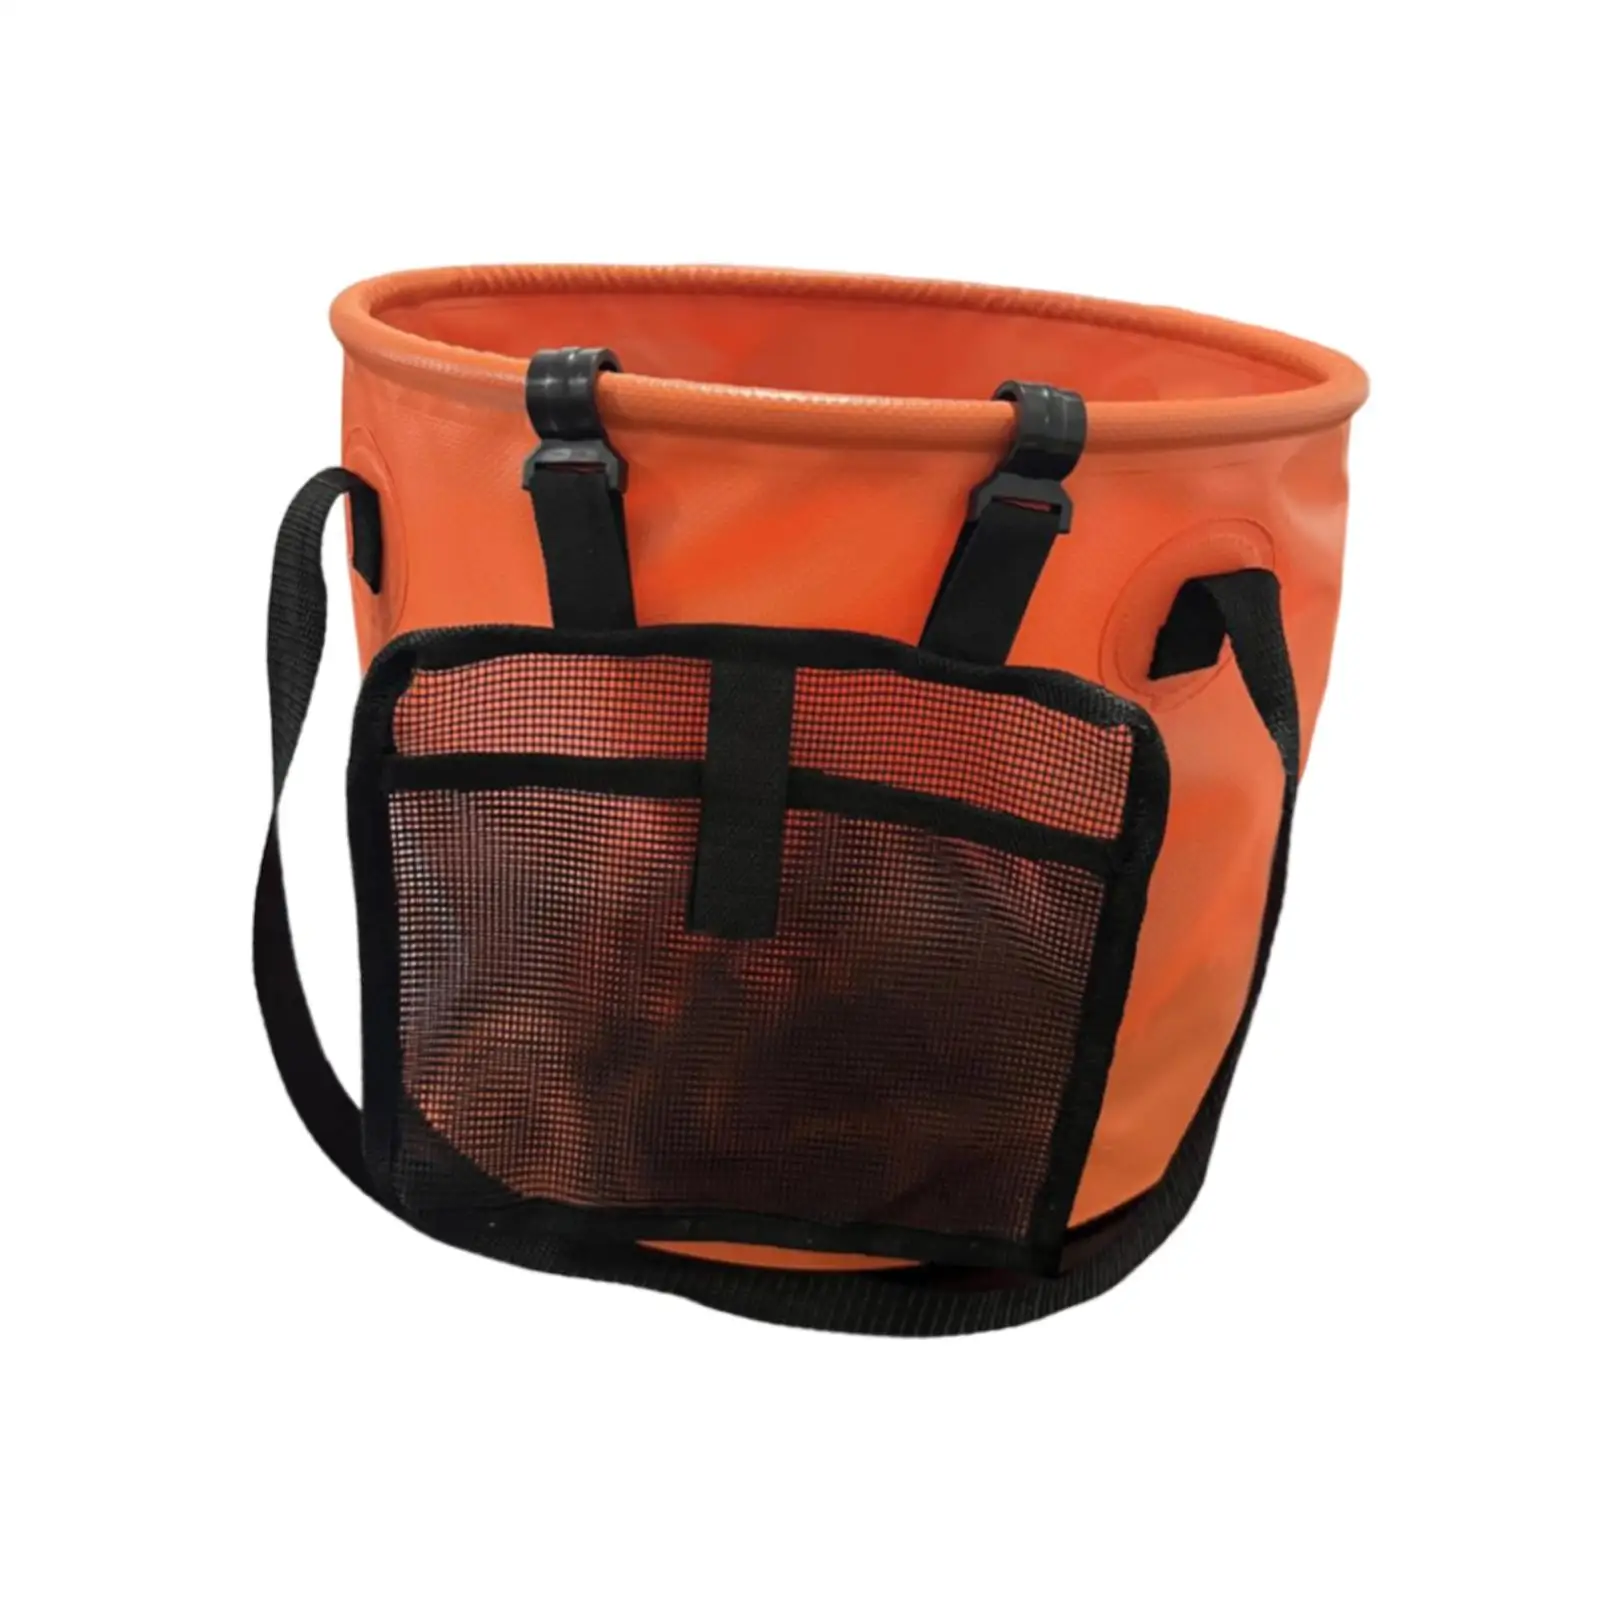 Collapsible Bucket Basin Pail 6 Gallon Water Container Foldable Water Bucket for Travelling Hiking Pool Washing Gardening